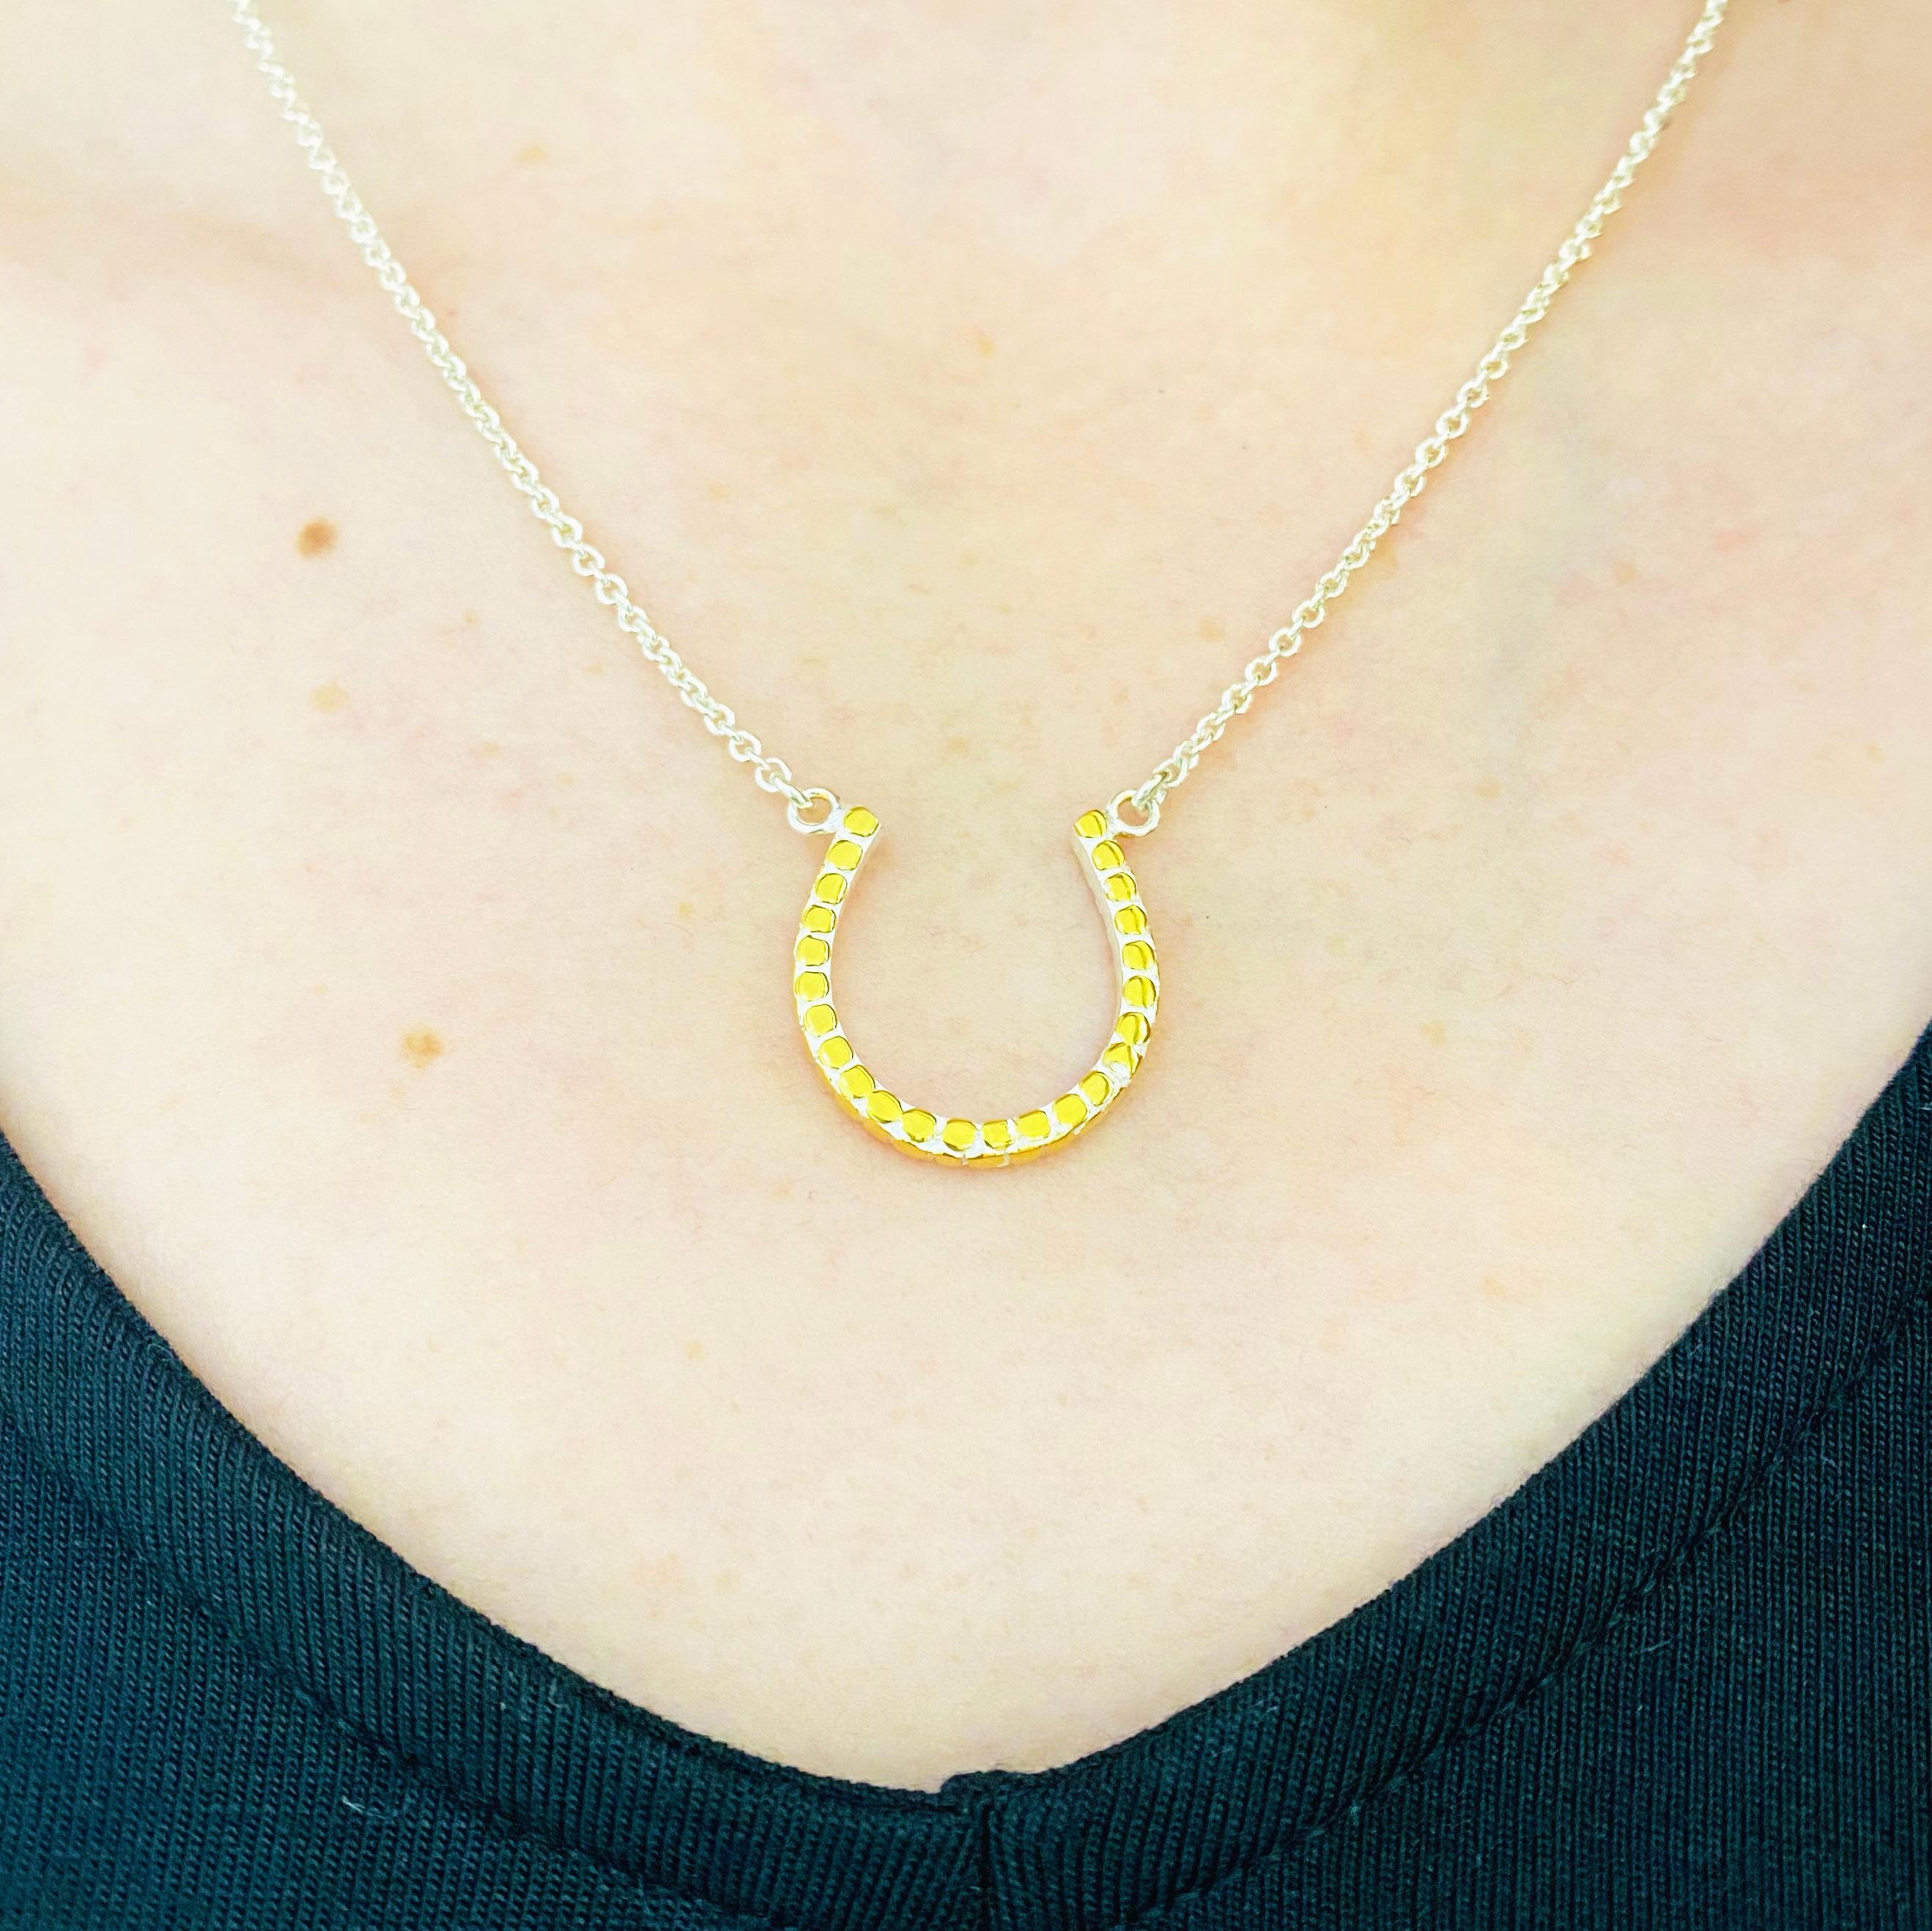 This gorgeous horseshoe pendant is a stunning and striking design. The horseshoe pendant is made in genuine 925 sterling silver and 18 karat yellow gold. The metal is a unique, anti-tarnish sterling silver. This pendant is on an 16 inch chain that